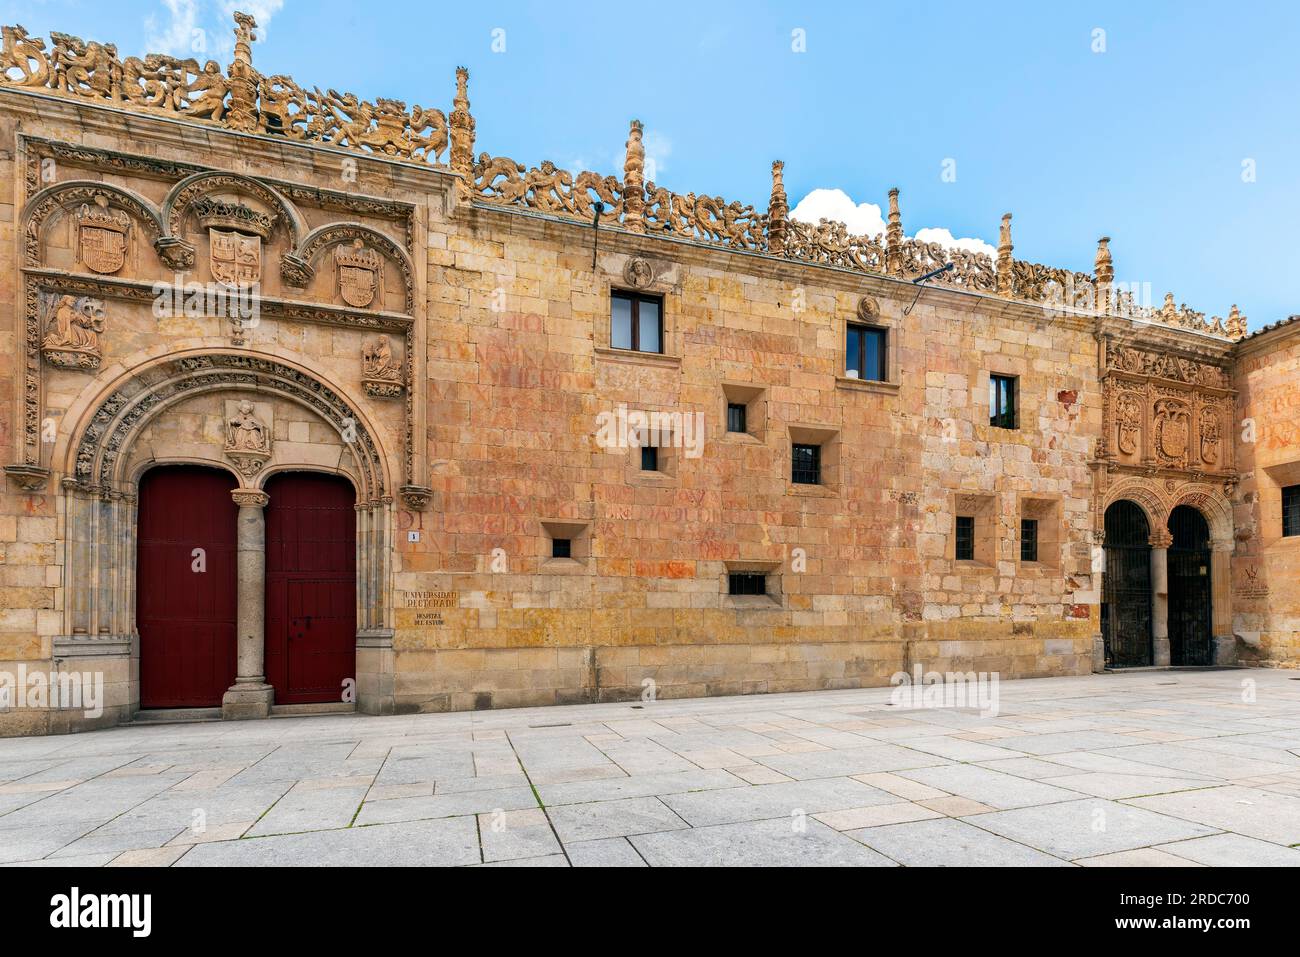 Square called  the Patio de Excuelas at the University of Salamanca. Founded in 1134, it was the first university to receive the title ‘La Universidad Stock Photo